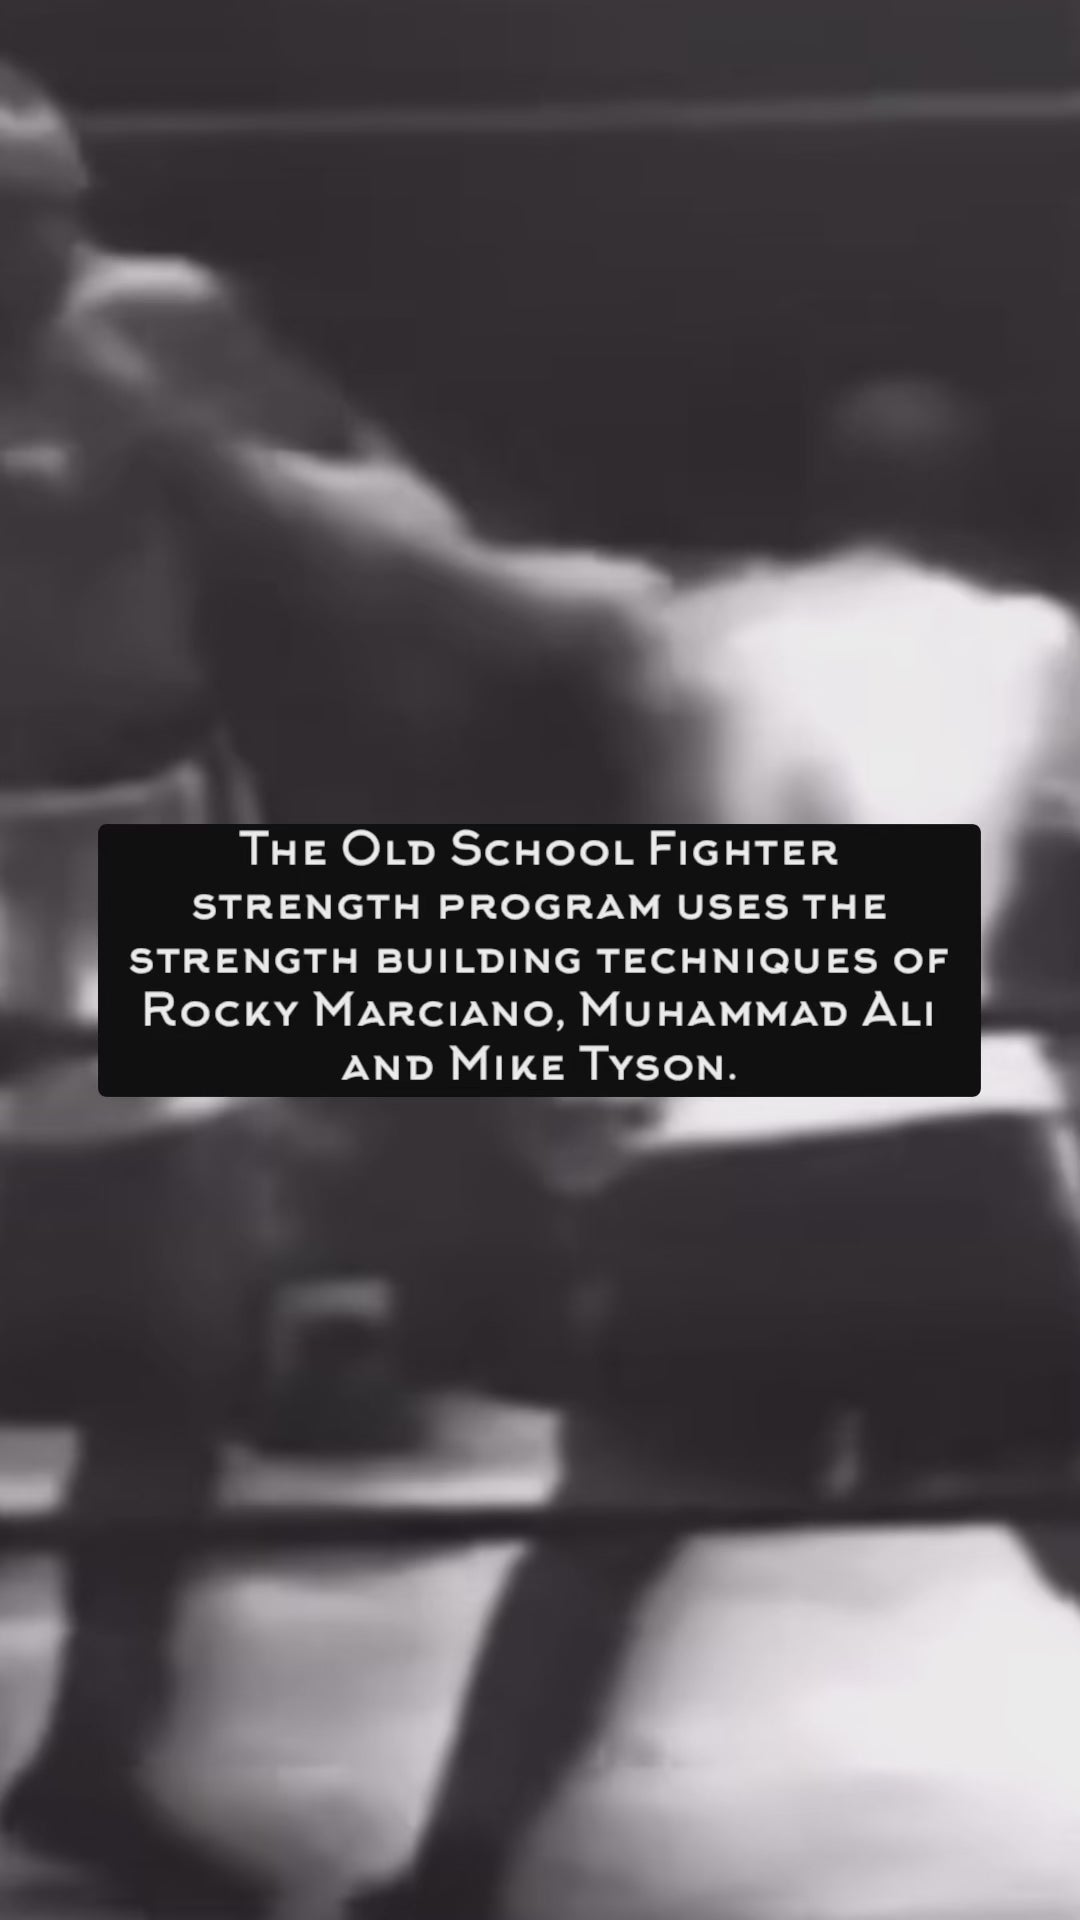 Old school fighters were some of the toughest, strongest and grittiest men in history. Their training, skills and battles were nothing short of legendary. Rocky Marciano’s right hand is described as “the most devastating weapon to ever enter the ring” while the speed and movement of Muhammad Ali were nothing short of supernatural.